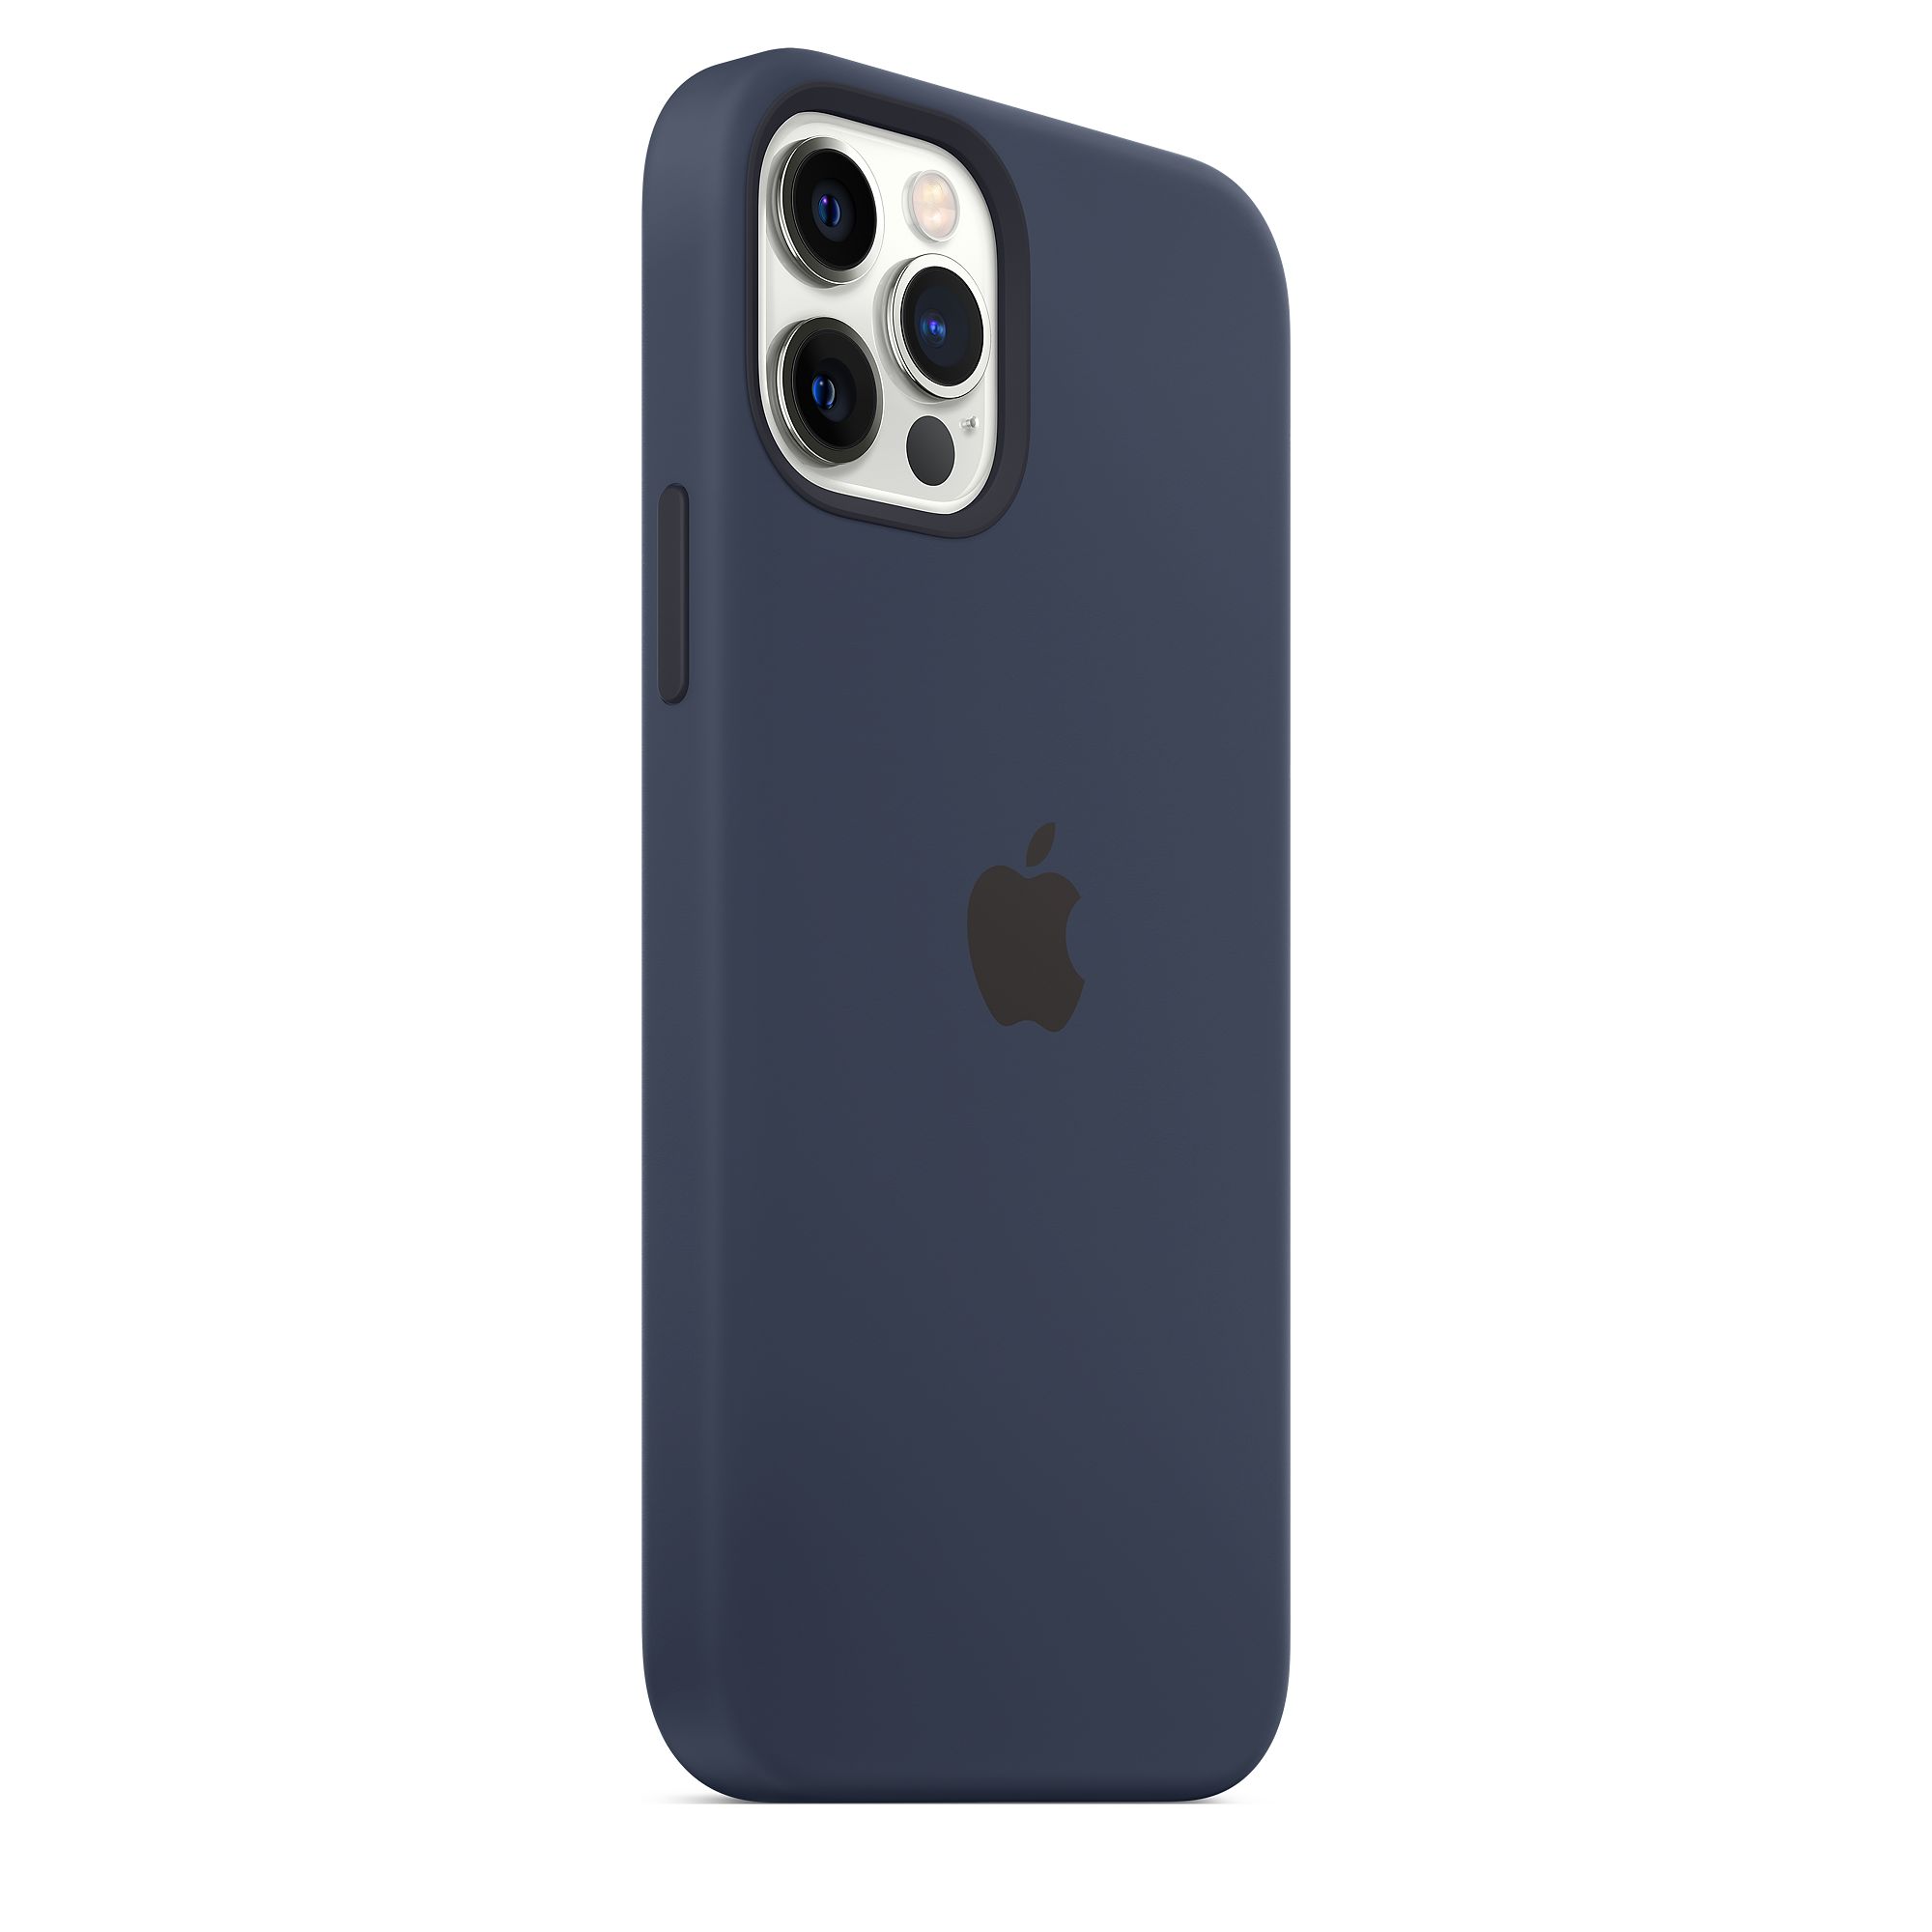 Silicon Case for iPhone 12 Pro Max (Deep Navy)